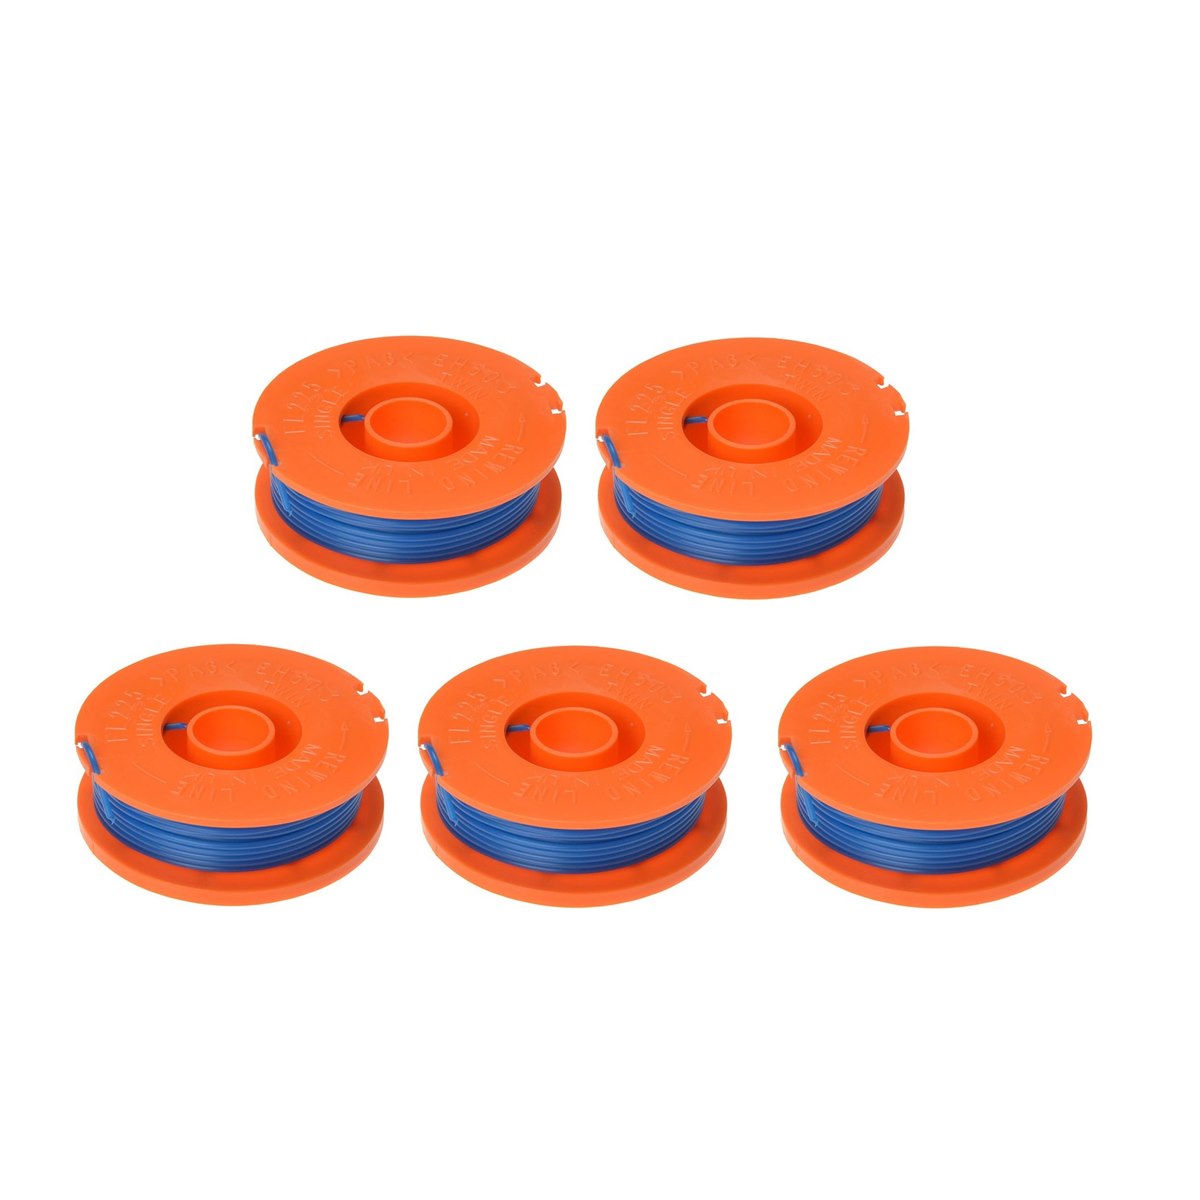 Case of 5 x ALM FL225 Spool and Line for Flymo Trimmers